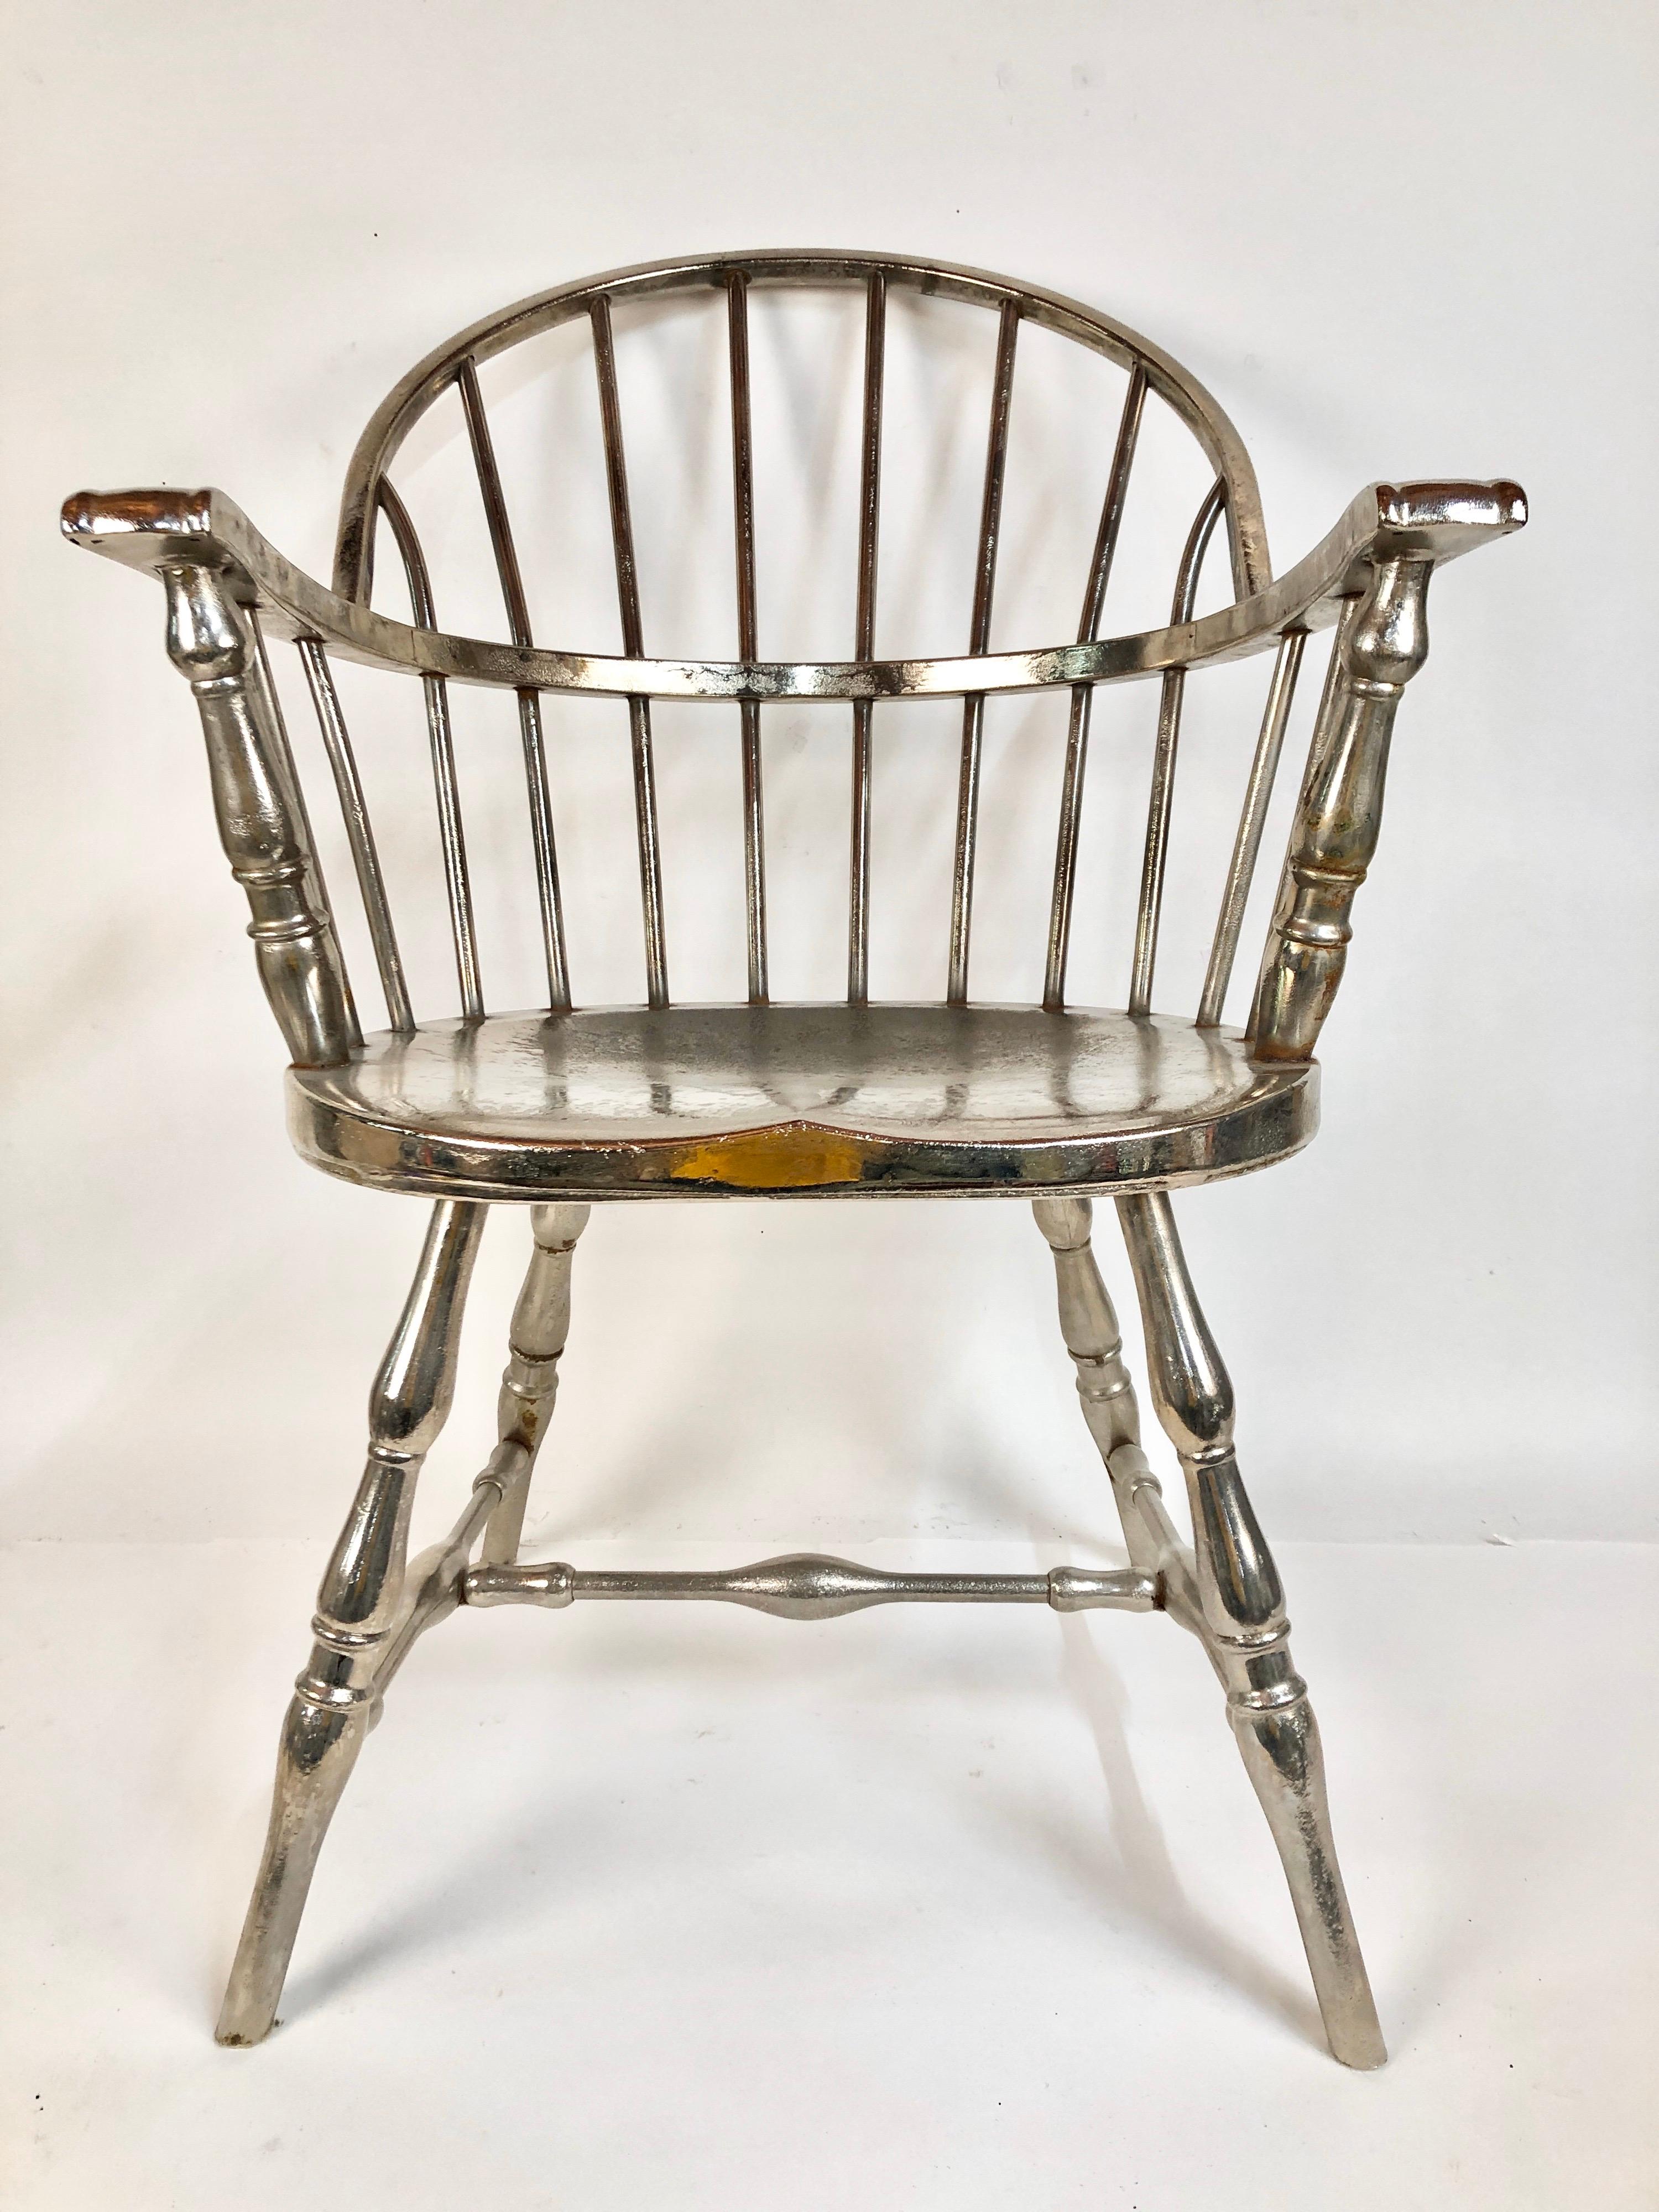 A rare all steel Windsor chair made by the Canton Art Metal Co for the Philadelphia Library, circa 1930. This one had been nickel plated at one time. Solid and extremely comfortable. Some rust spots, dings and discolorations but it great condition.